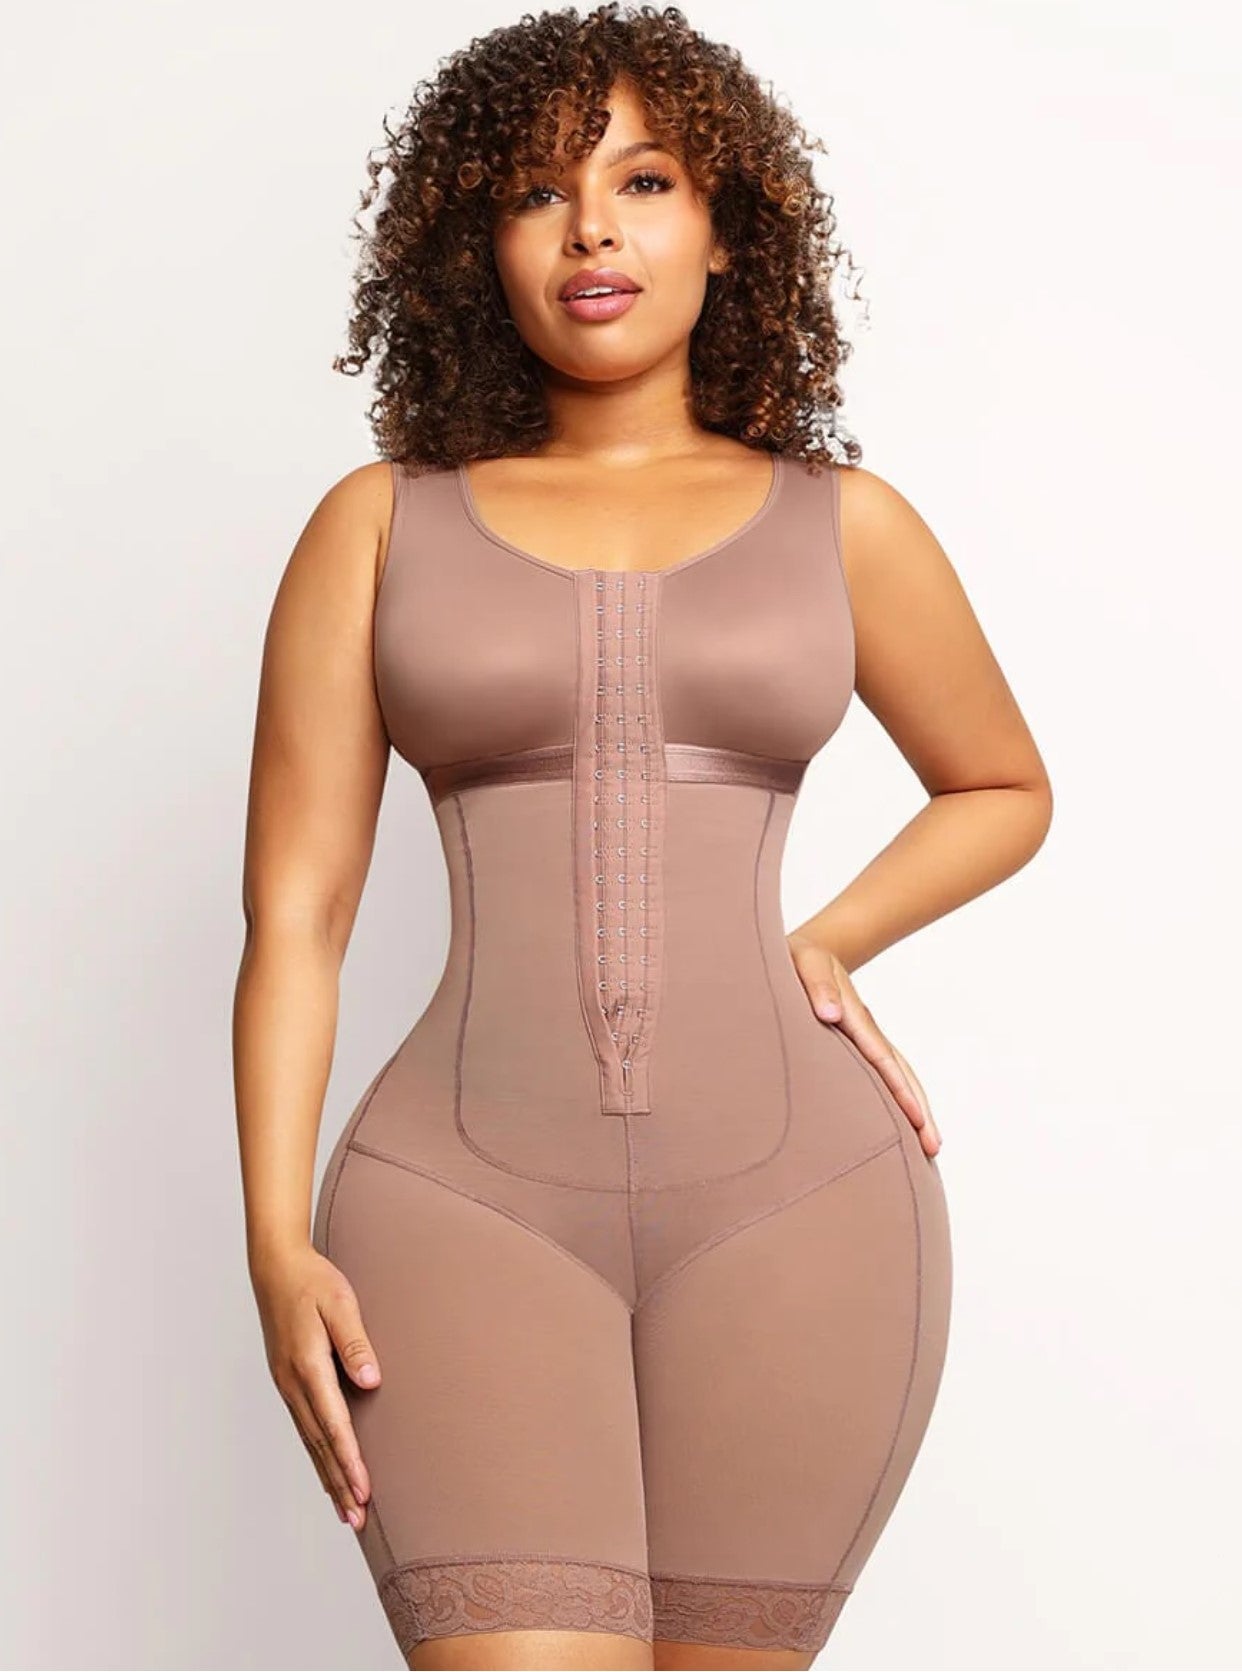 How Postpartum Compression is Different From Shapewear